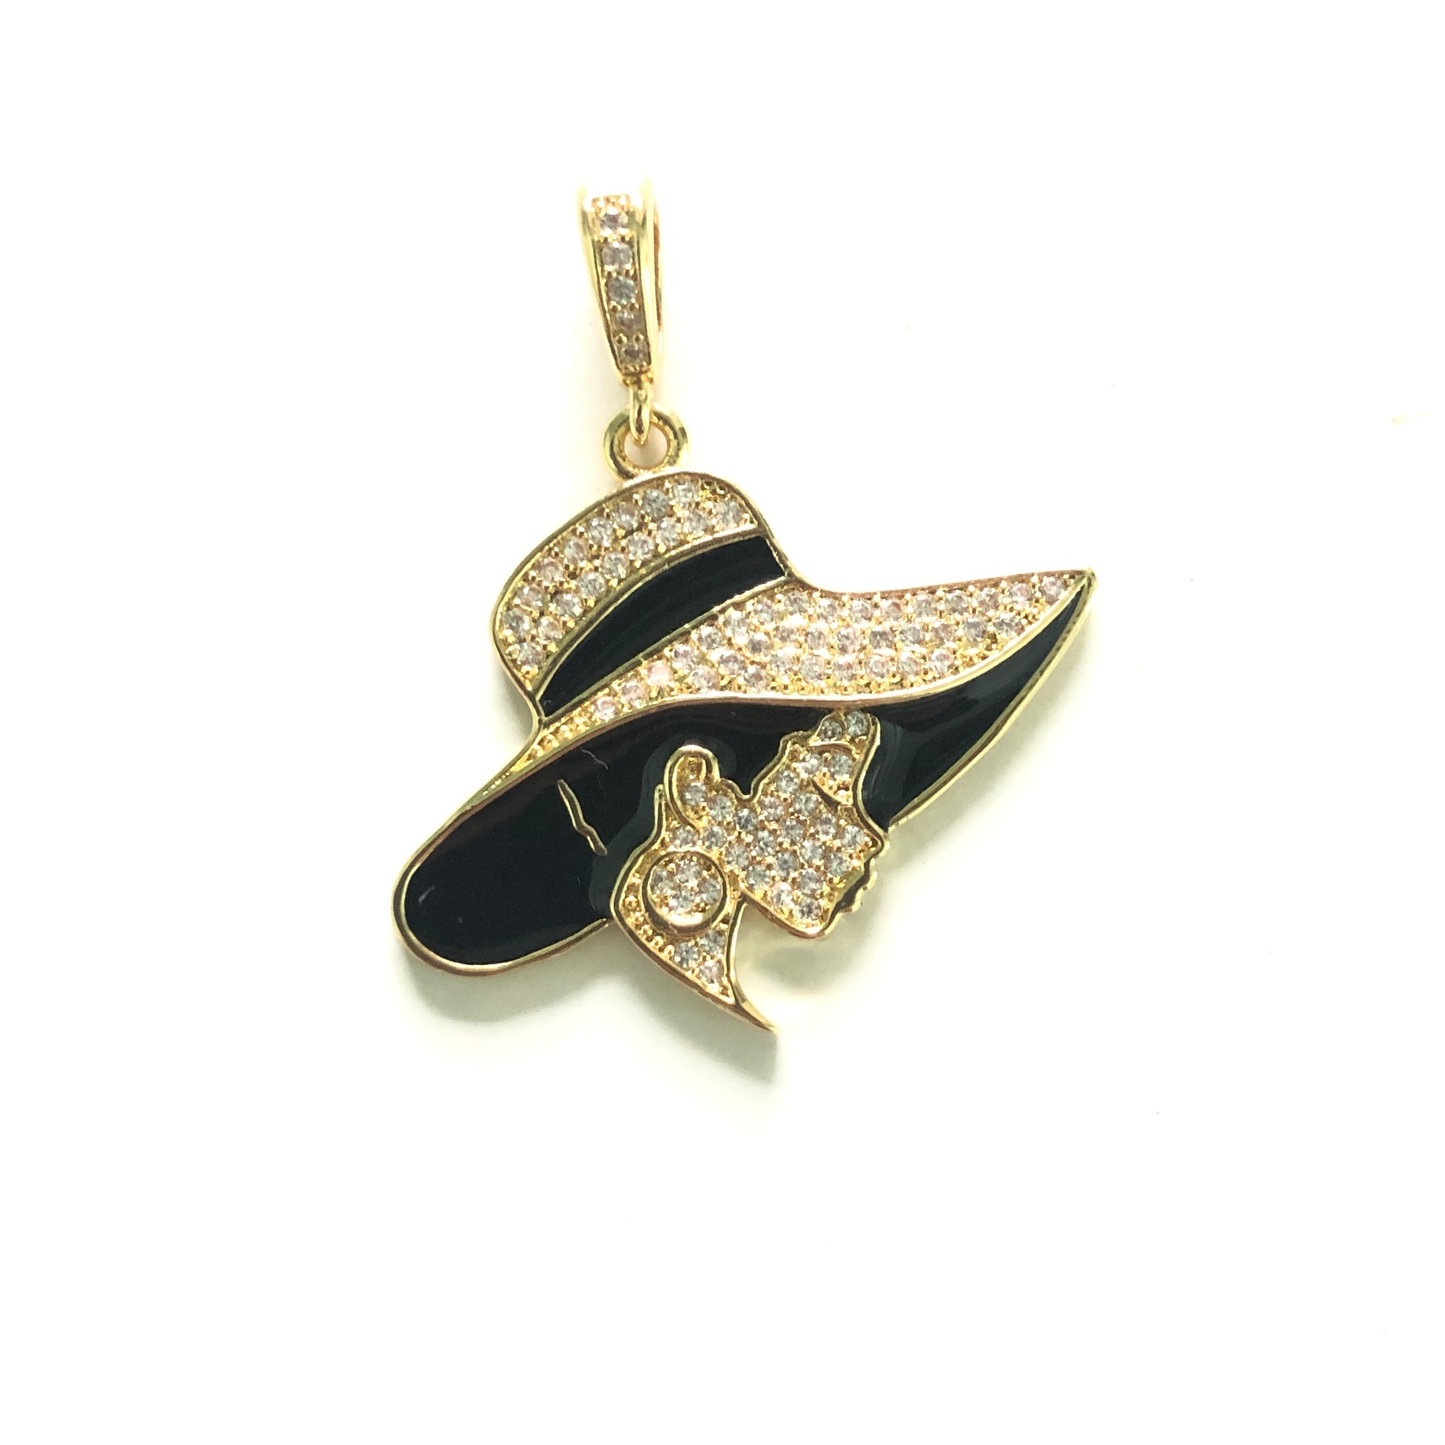 10pcs/lot 34*28mm CZ Afro Girl Lady in Hat Charms Gold CZ Paved Charms Afro Girl/Queen Charms Charms Beads Beyond